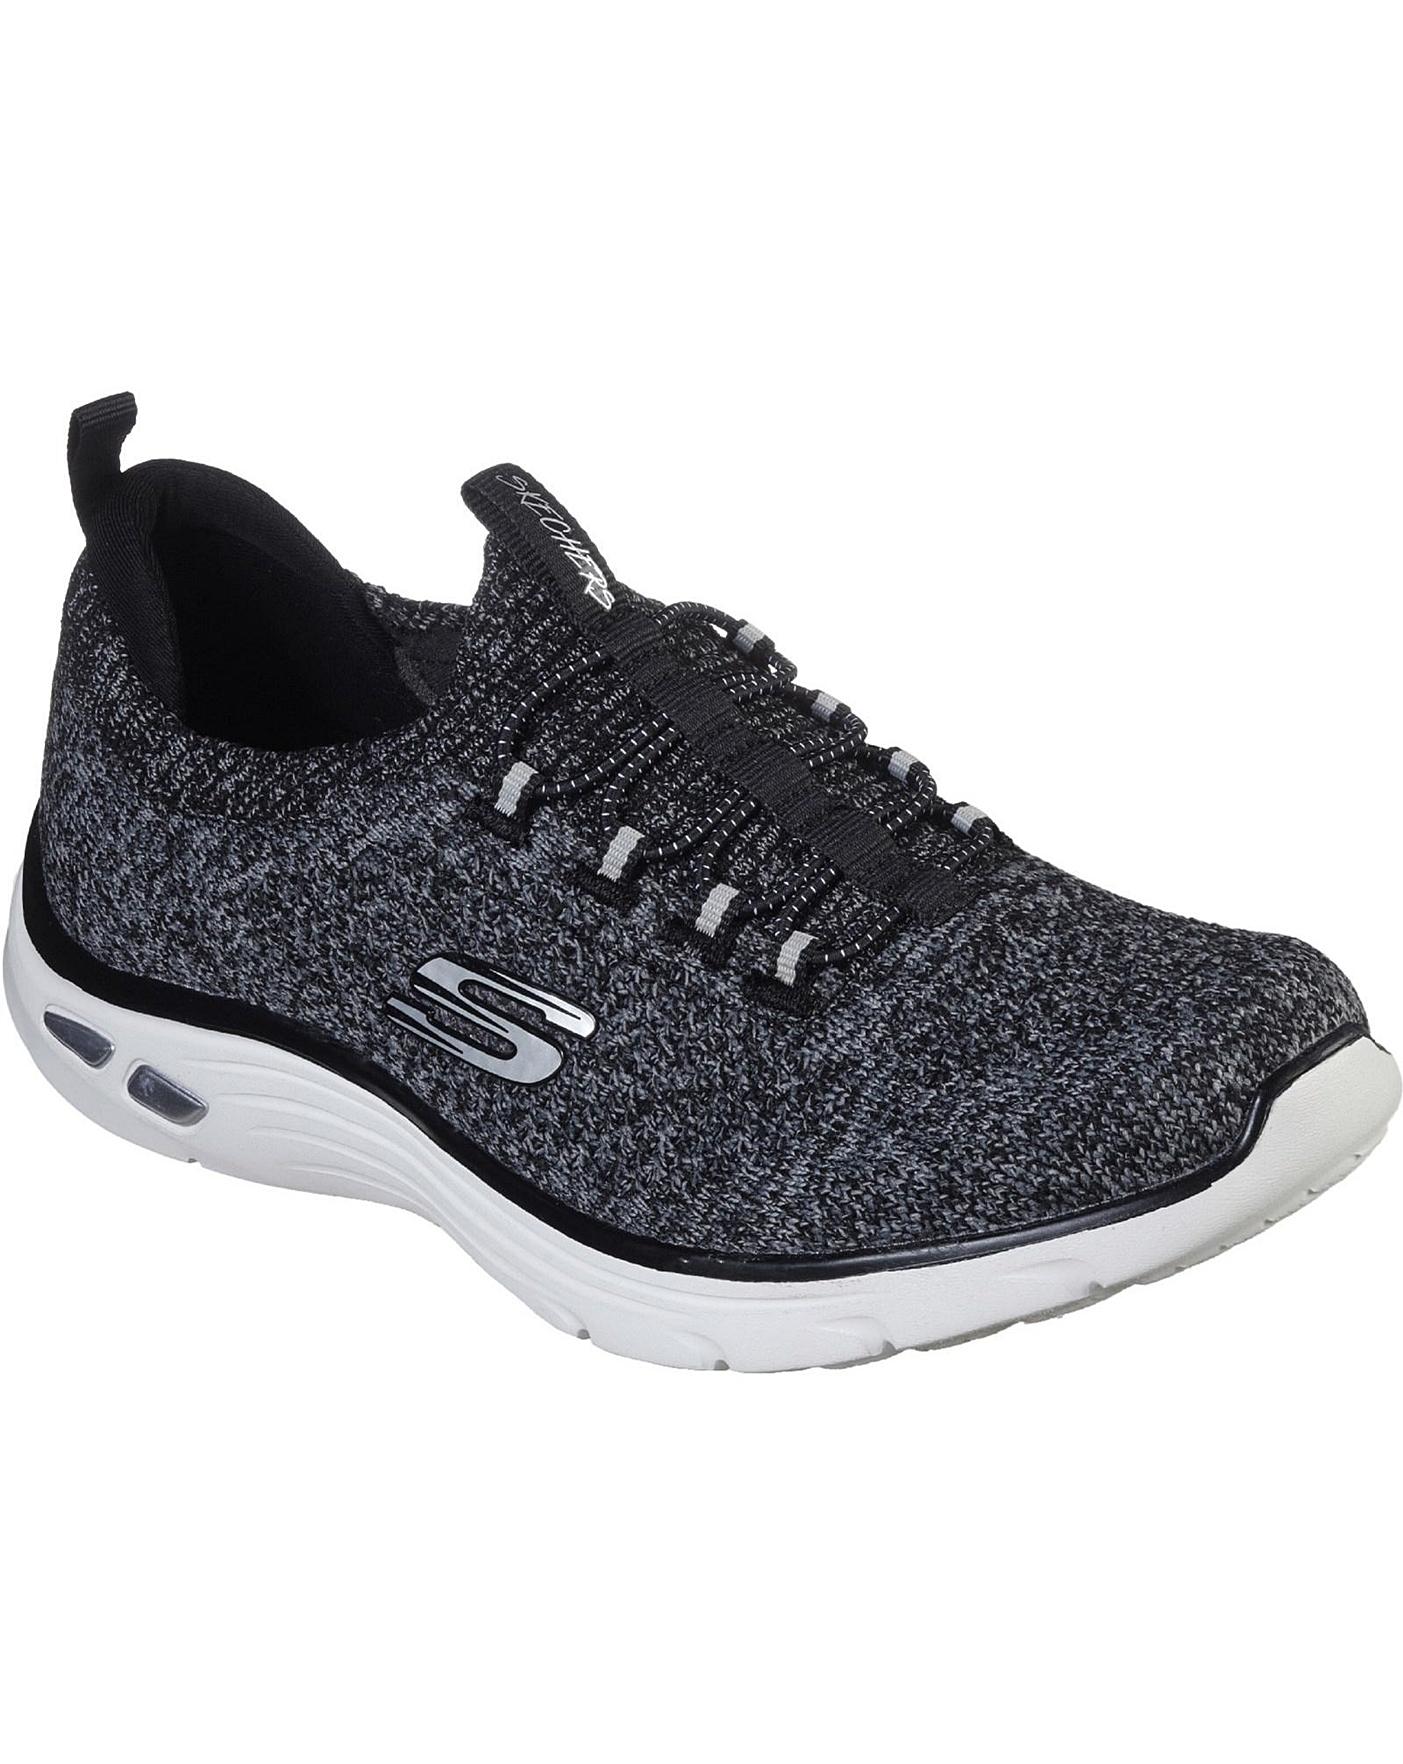 Skechers Relaxed Fit Sharp Witted Sports | J D Williams